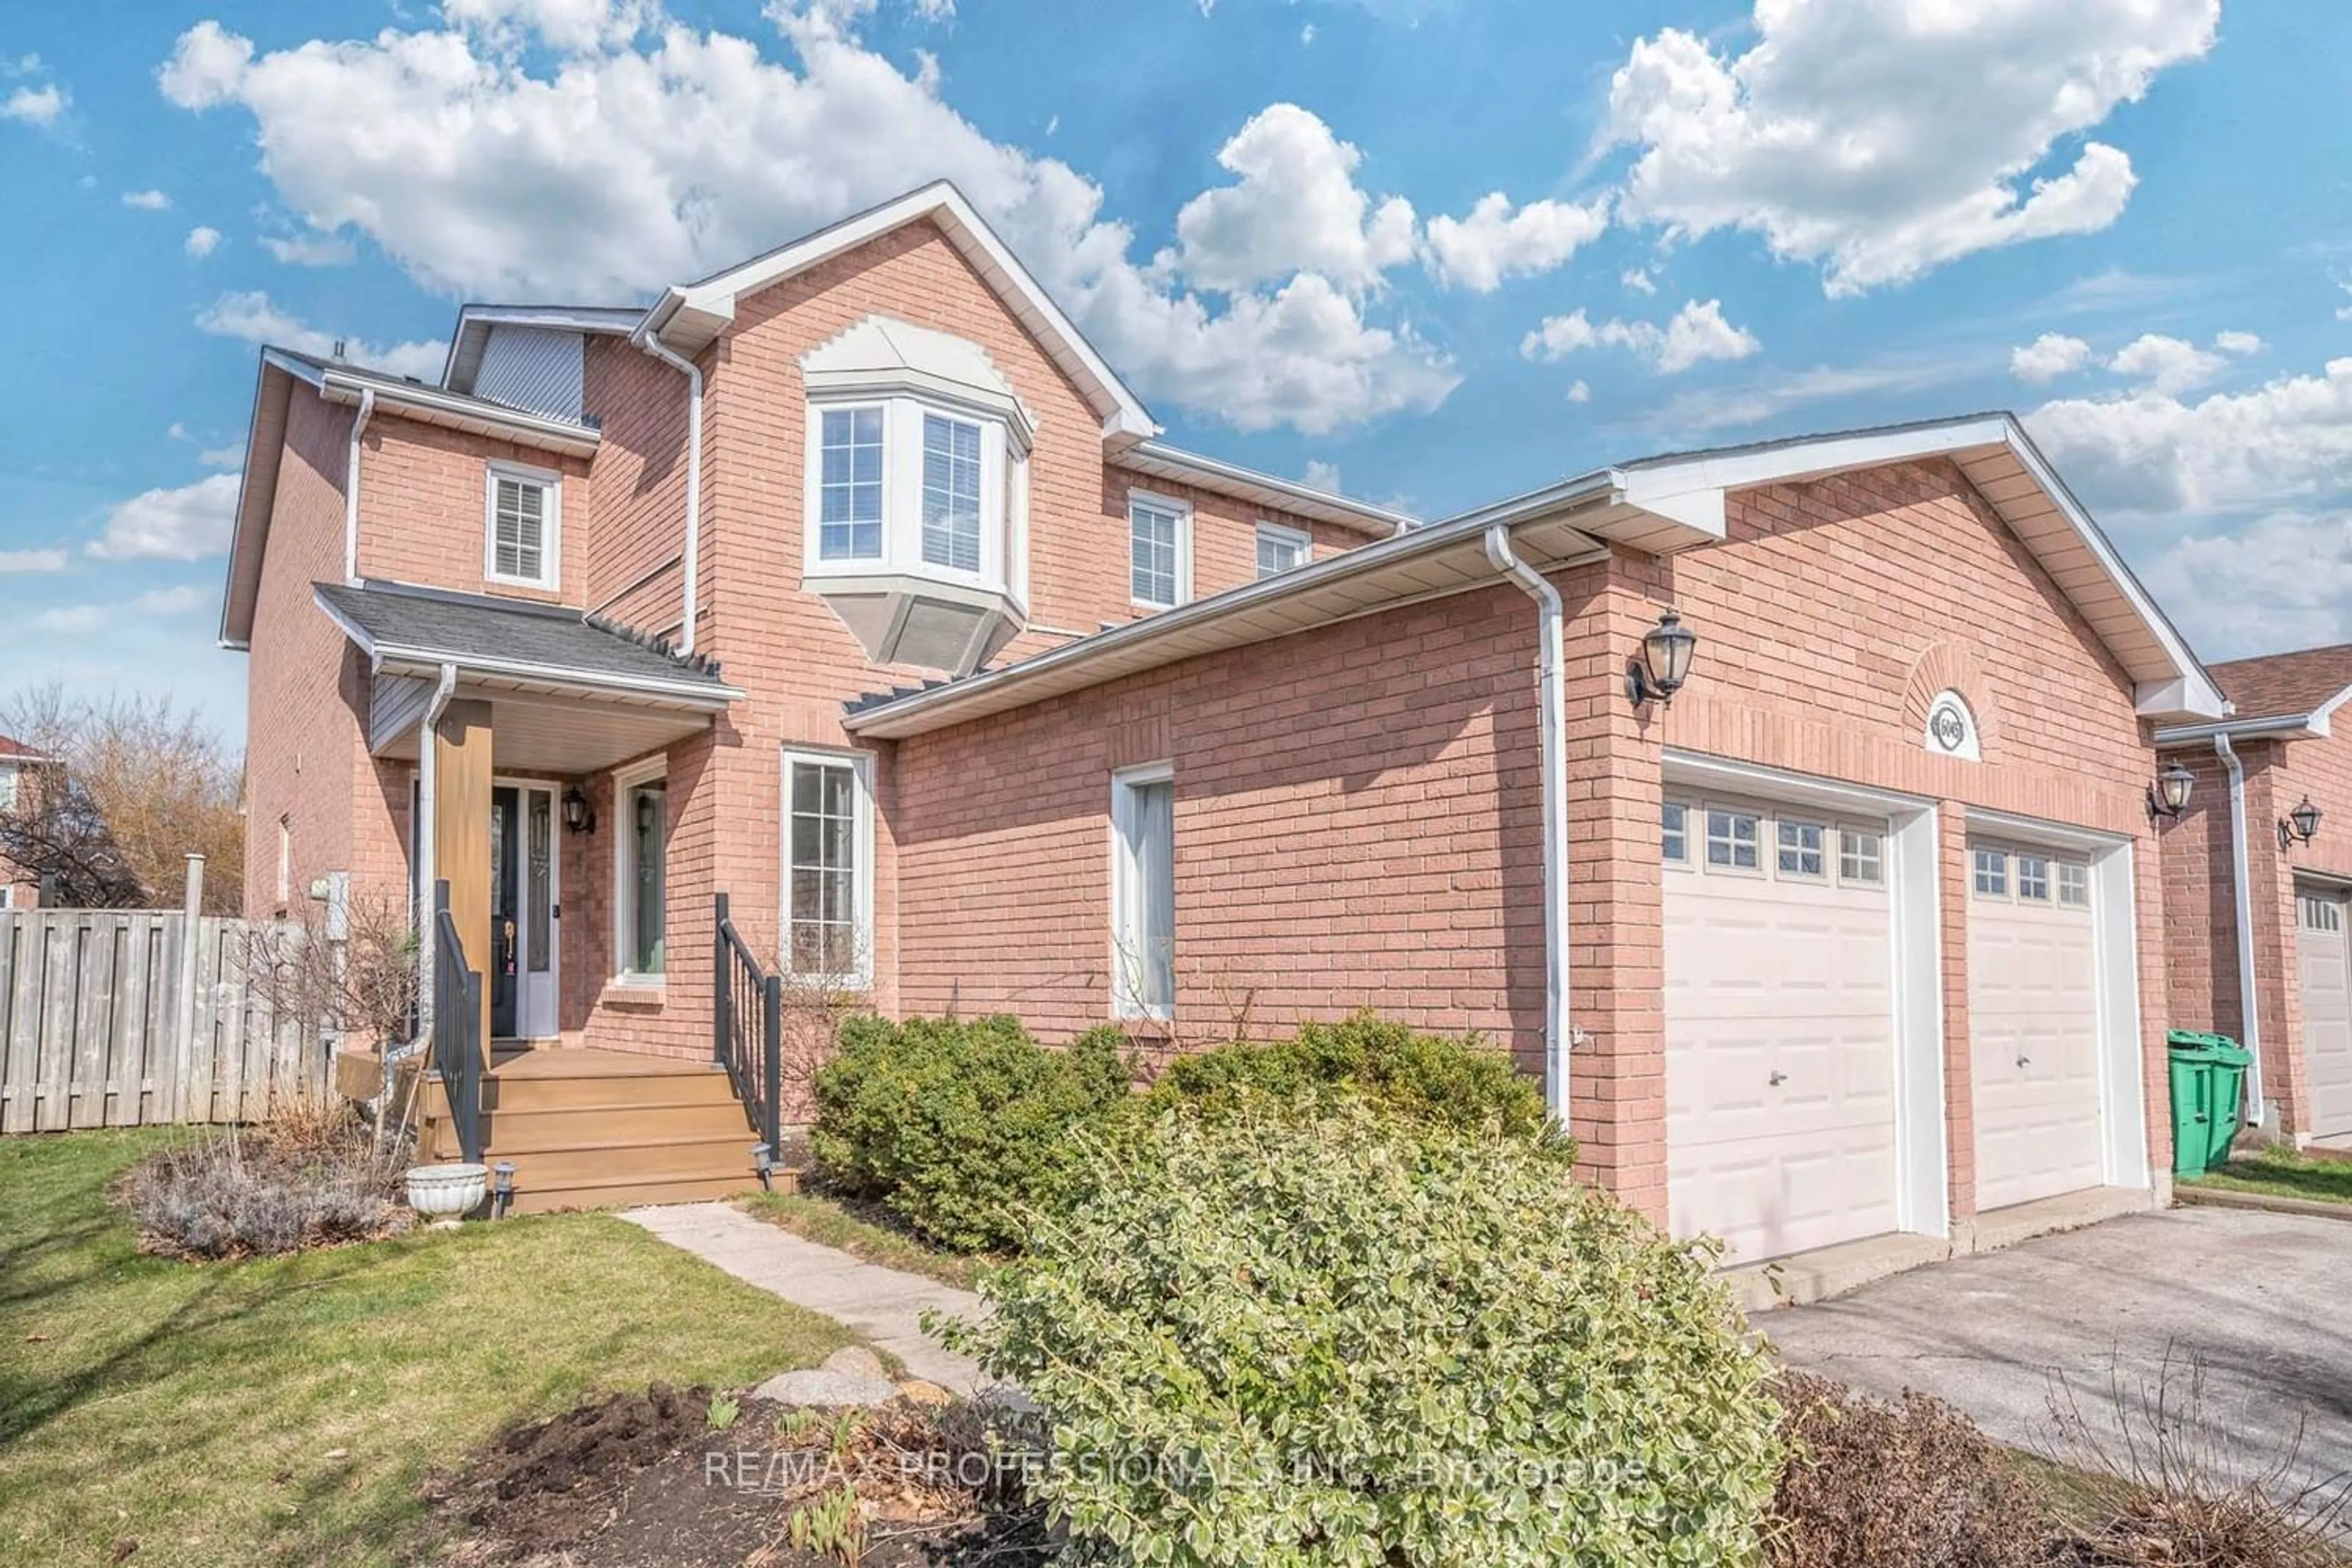 Home with brick exterior material for 6045 Grossbeak Dr, Mississauga Ontario L5N 5W9